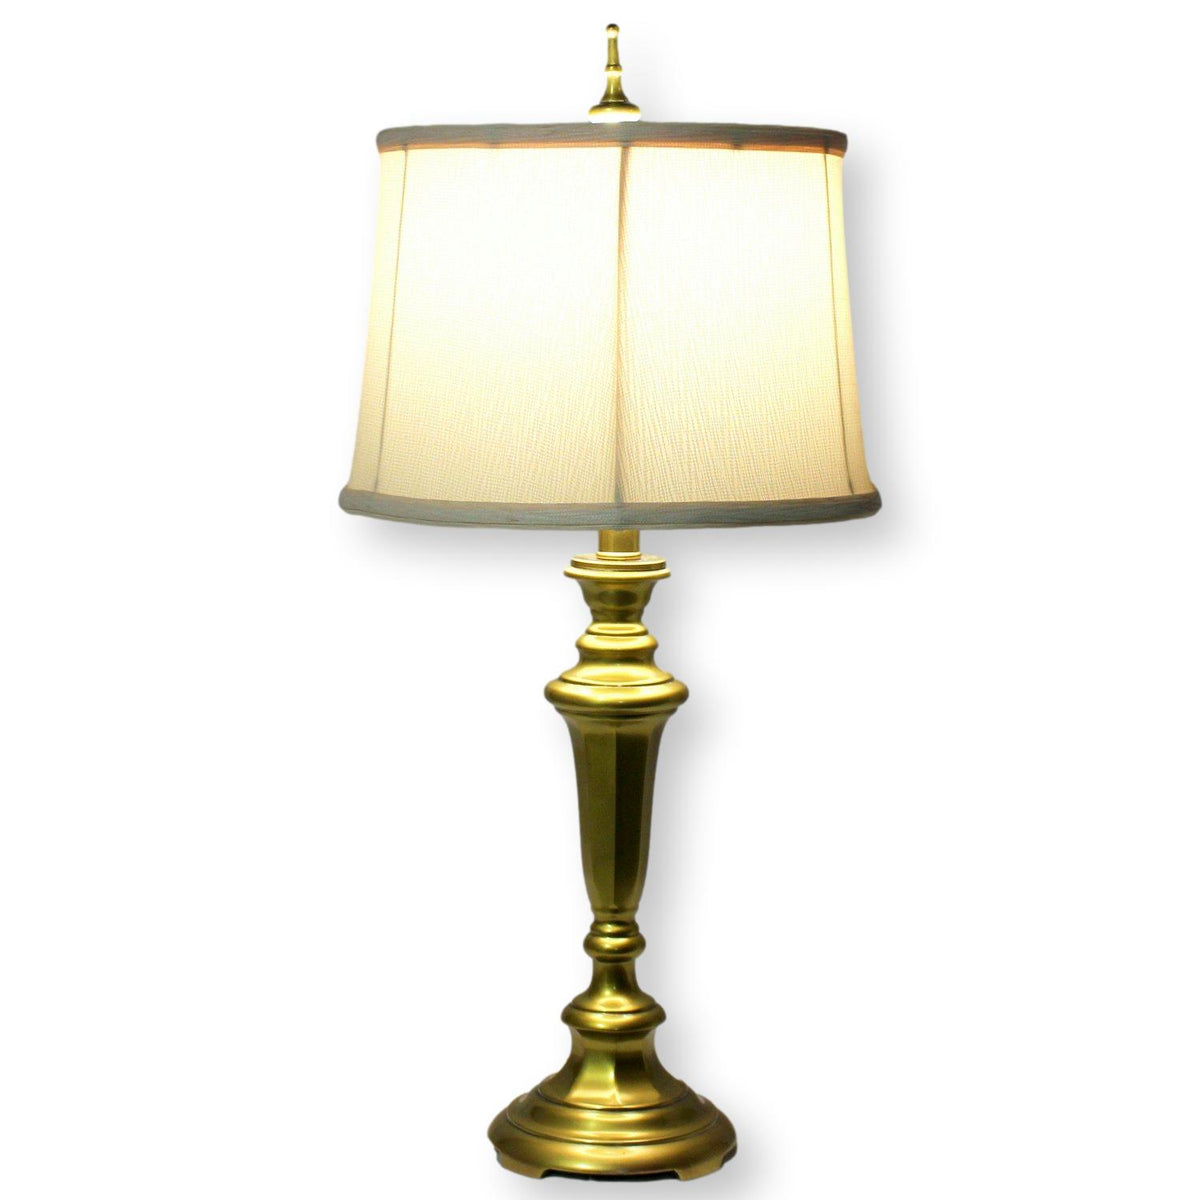 Burnished Brass Table Lamp w/Cream Shade